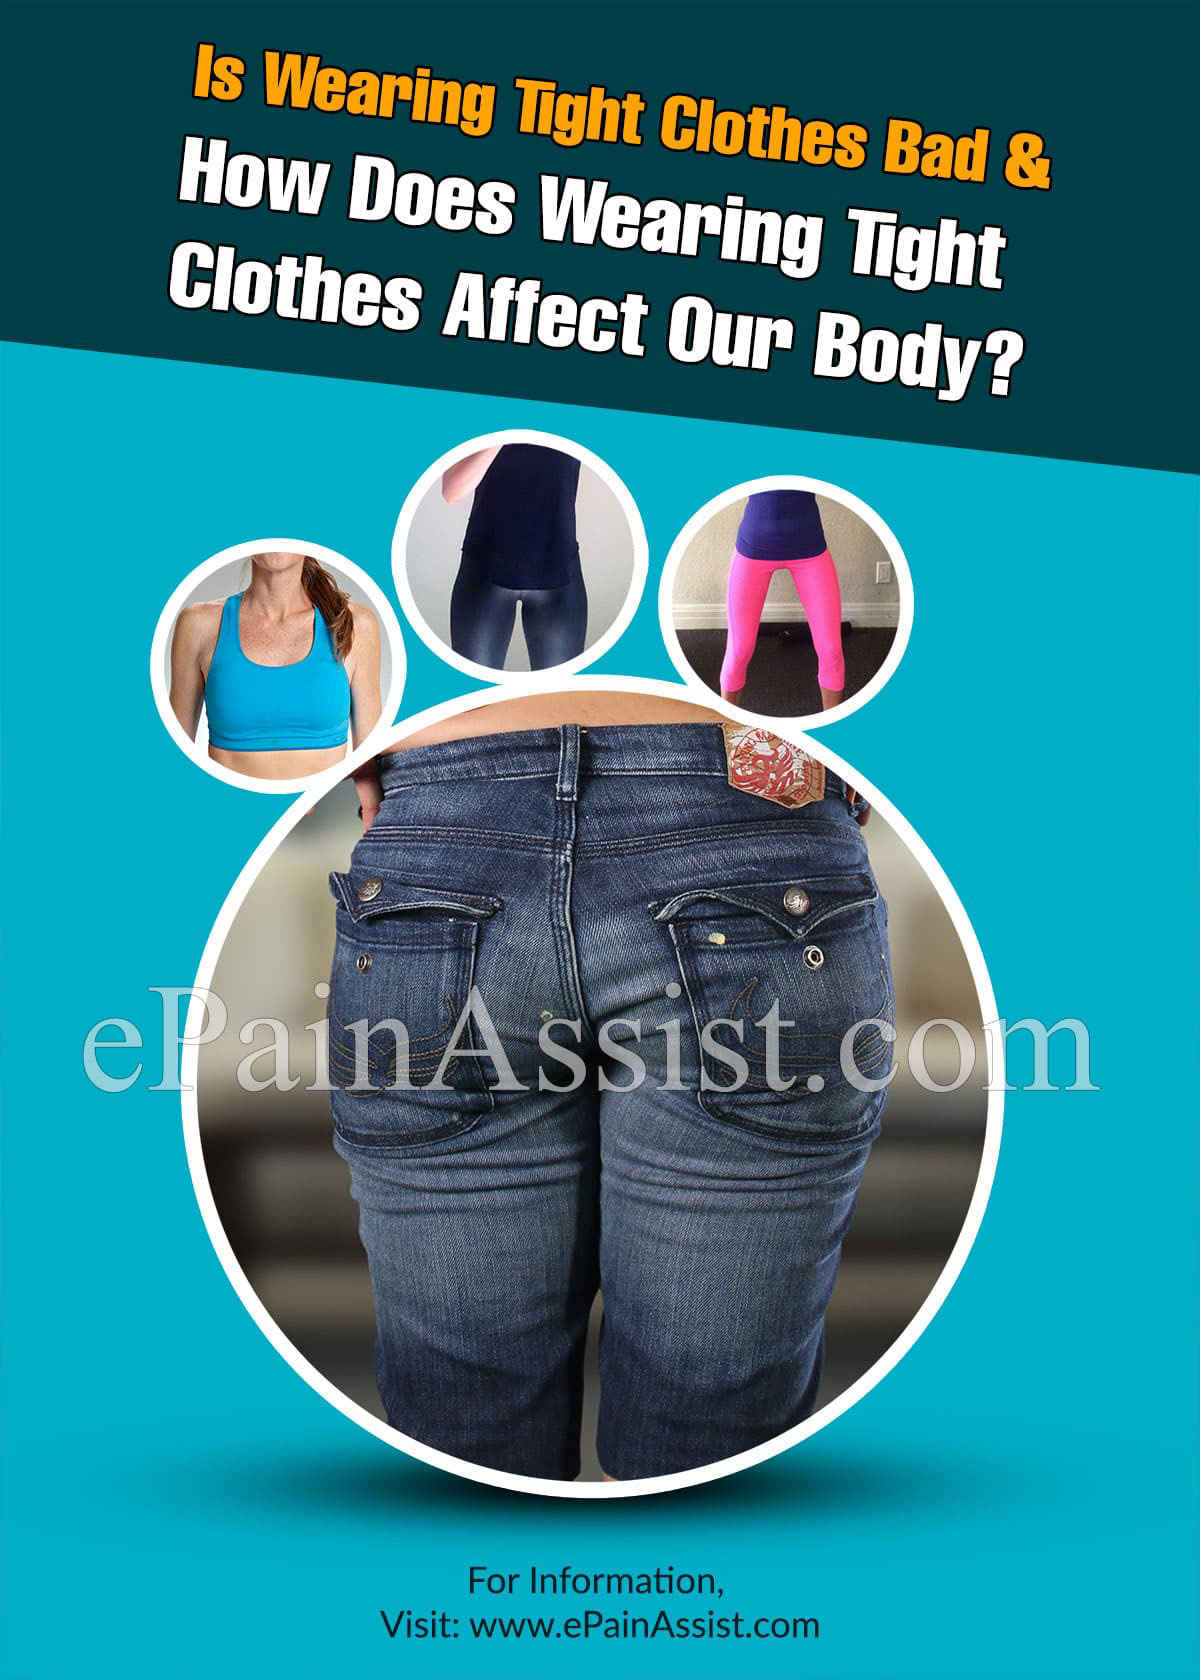 Effects of Wearing Skin Tight Clothes 